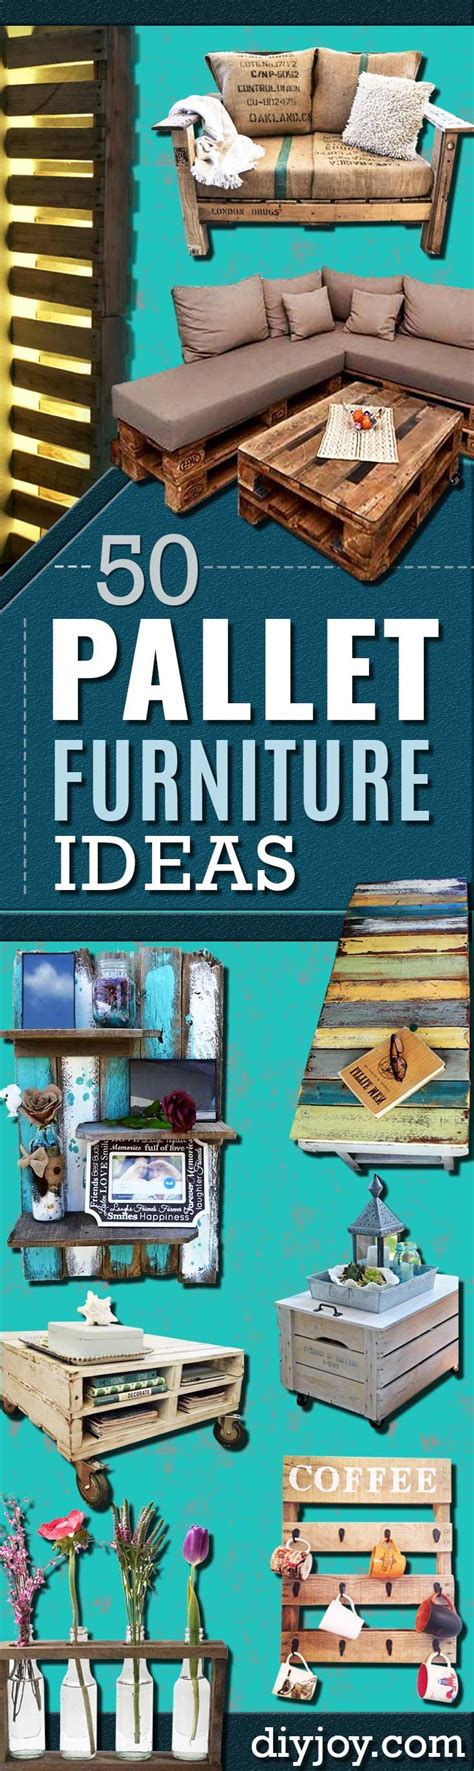 DIY Pallet Furniture Ideas - DIY Magic Storage Pallet Sofa - Best Do It Yourself Projects Made ...